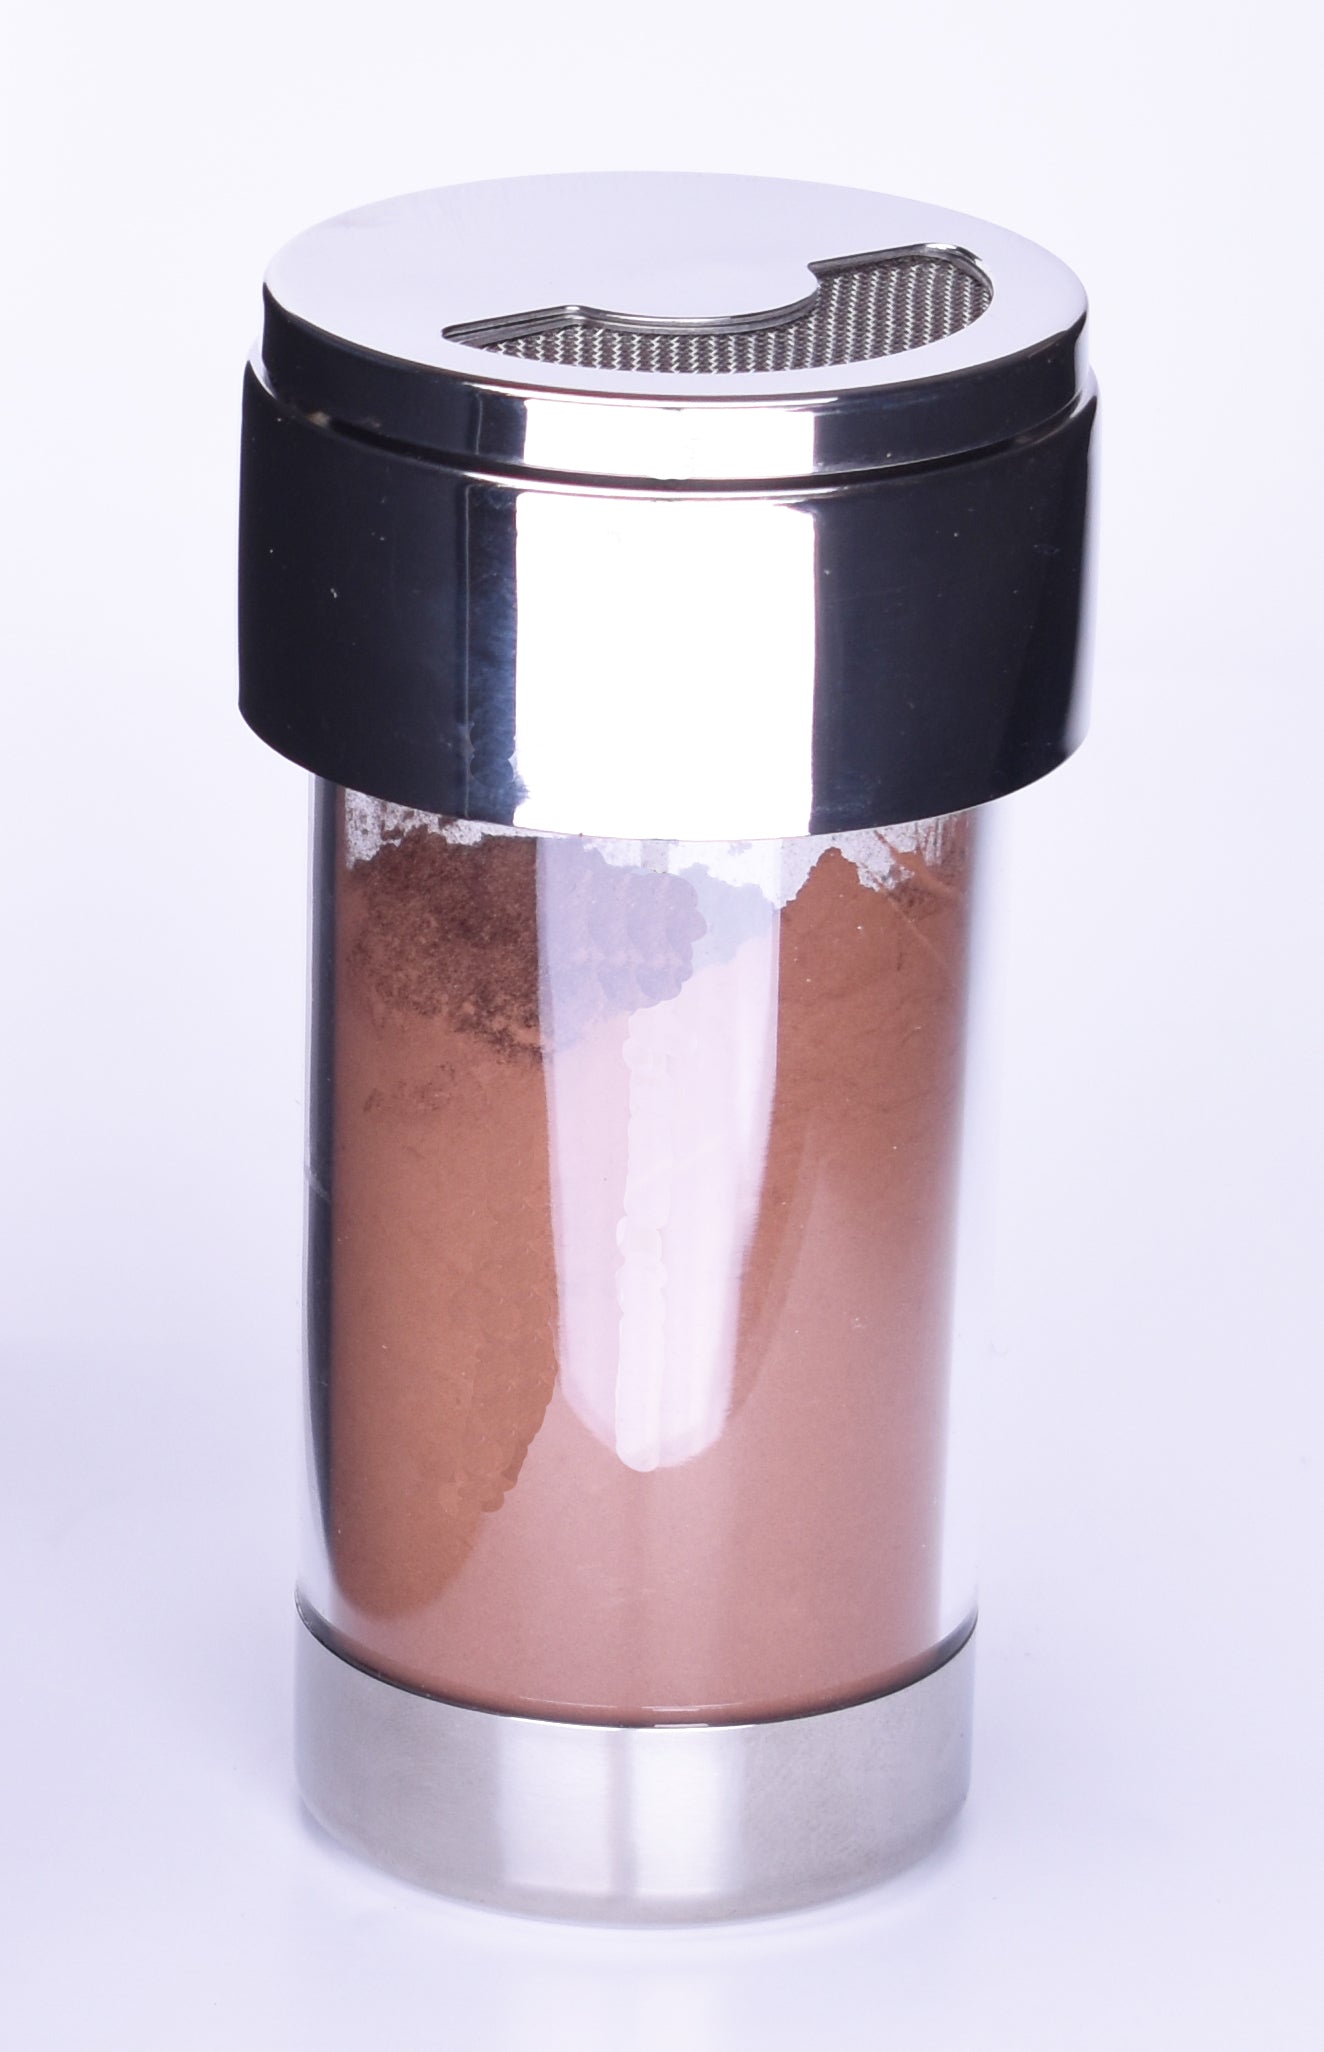 Chocolate dispenser filled with powder